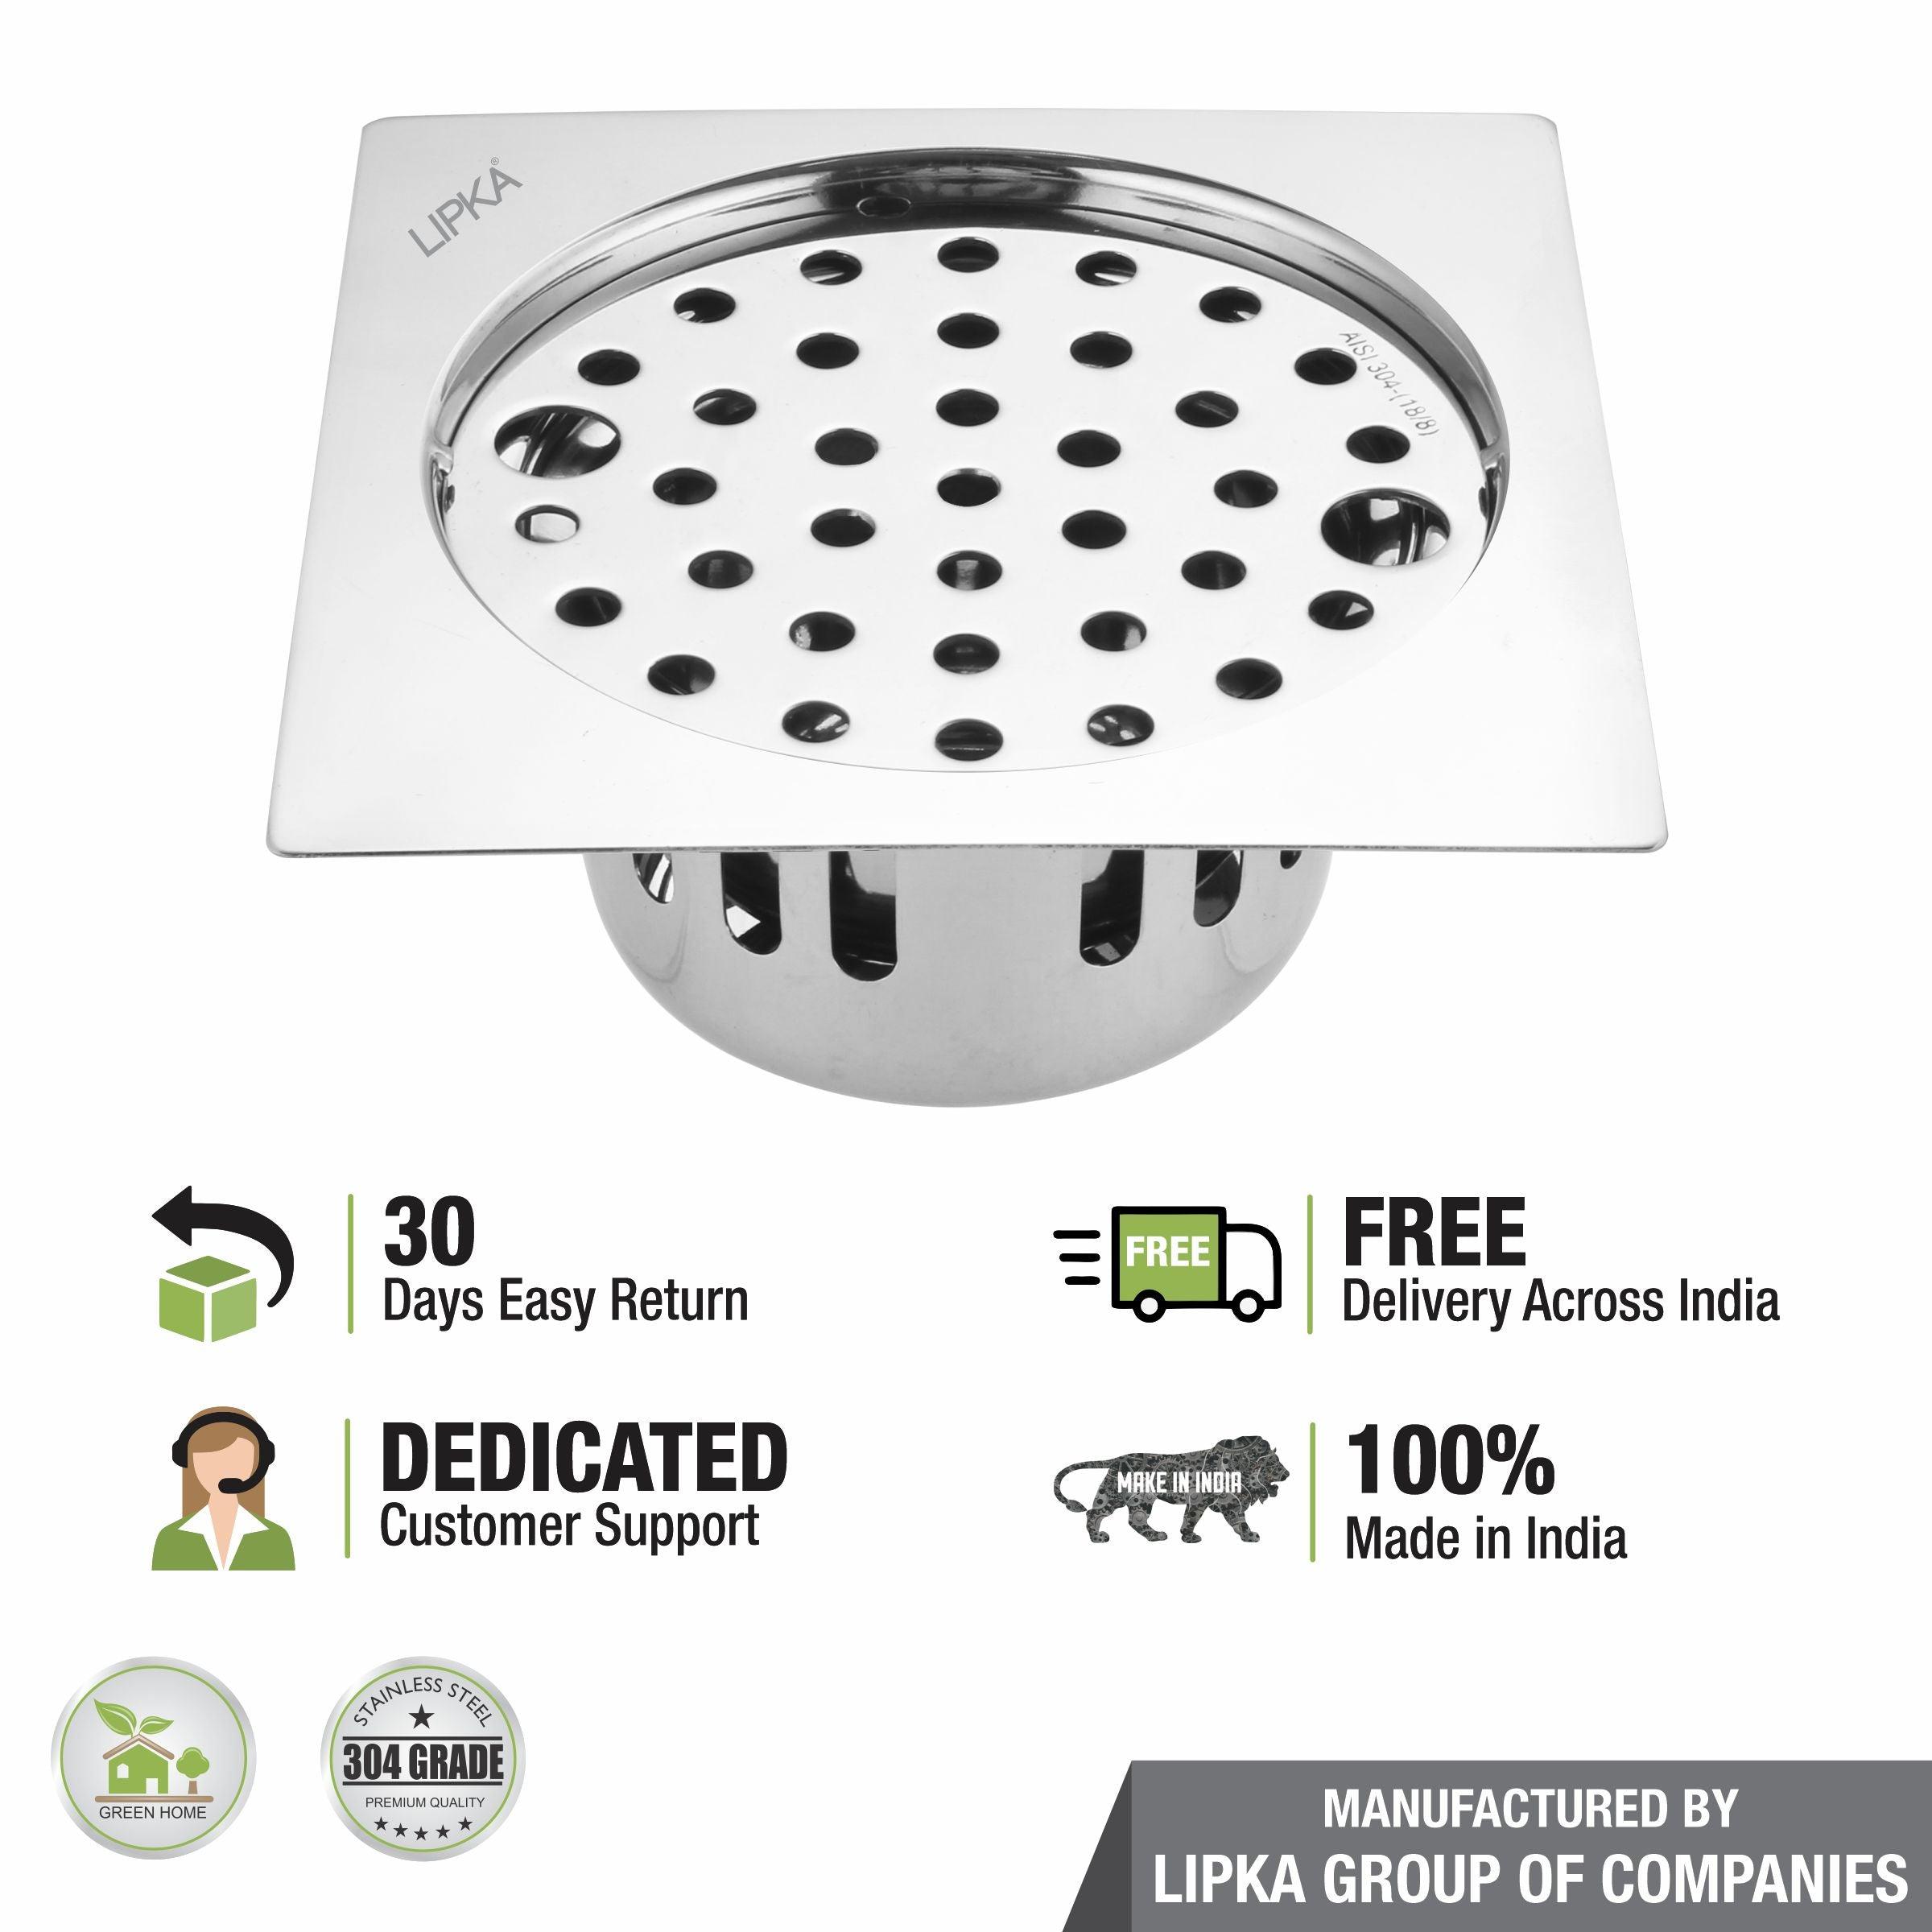 Square Flat Cut Floor Drain (5.5 x 5.5 Inches) with Lock and Cockroach Trap - LIPKA - Lipka Home